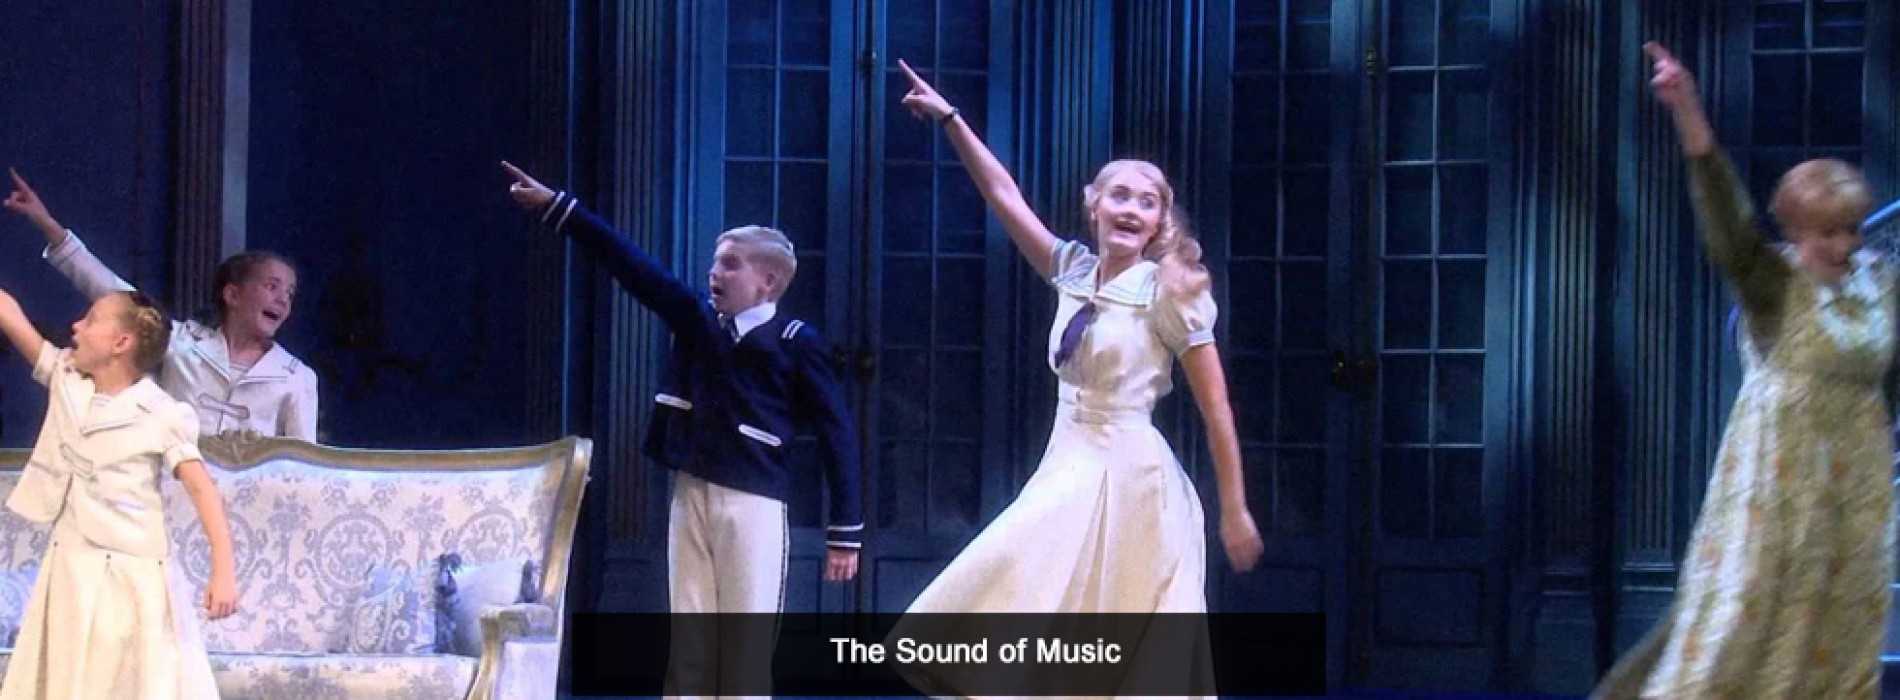 American musical group ‘The Sound of Music’ to perform for the first time in South Asia